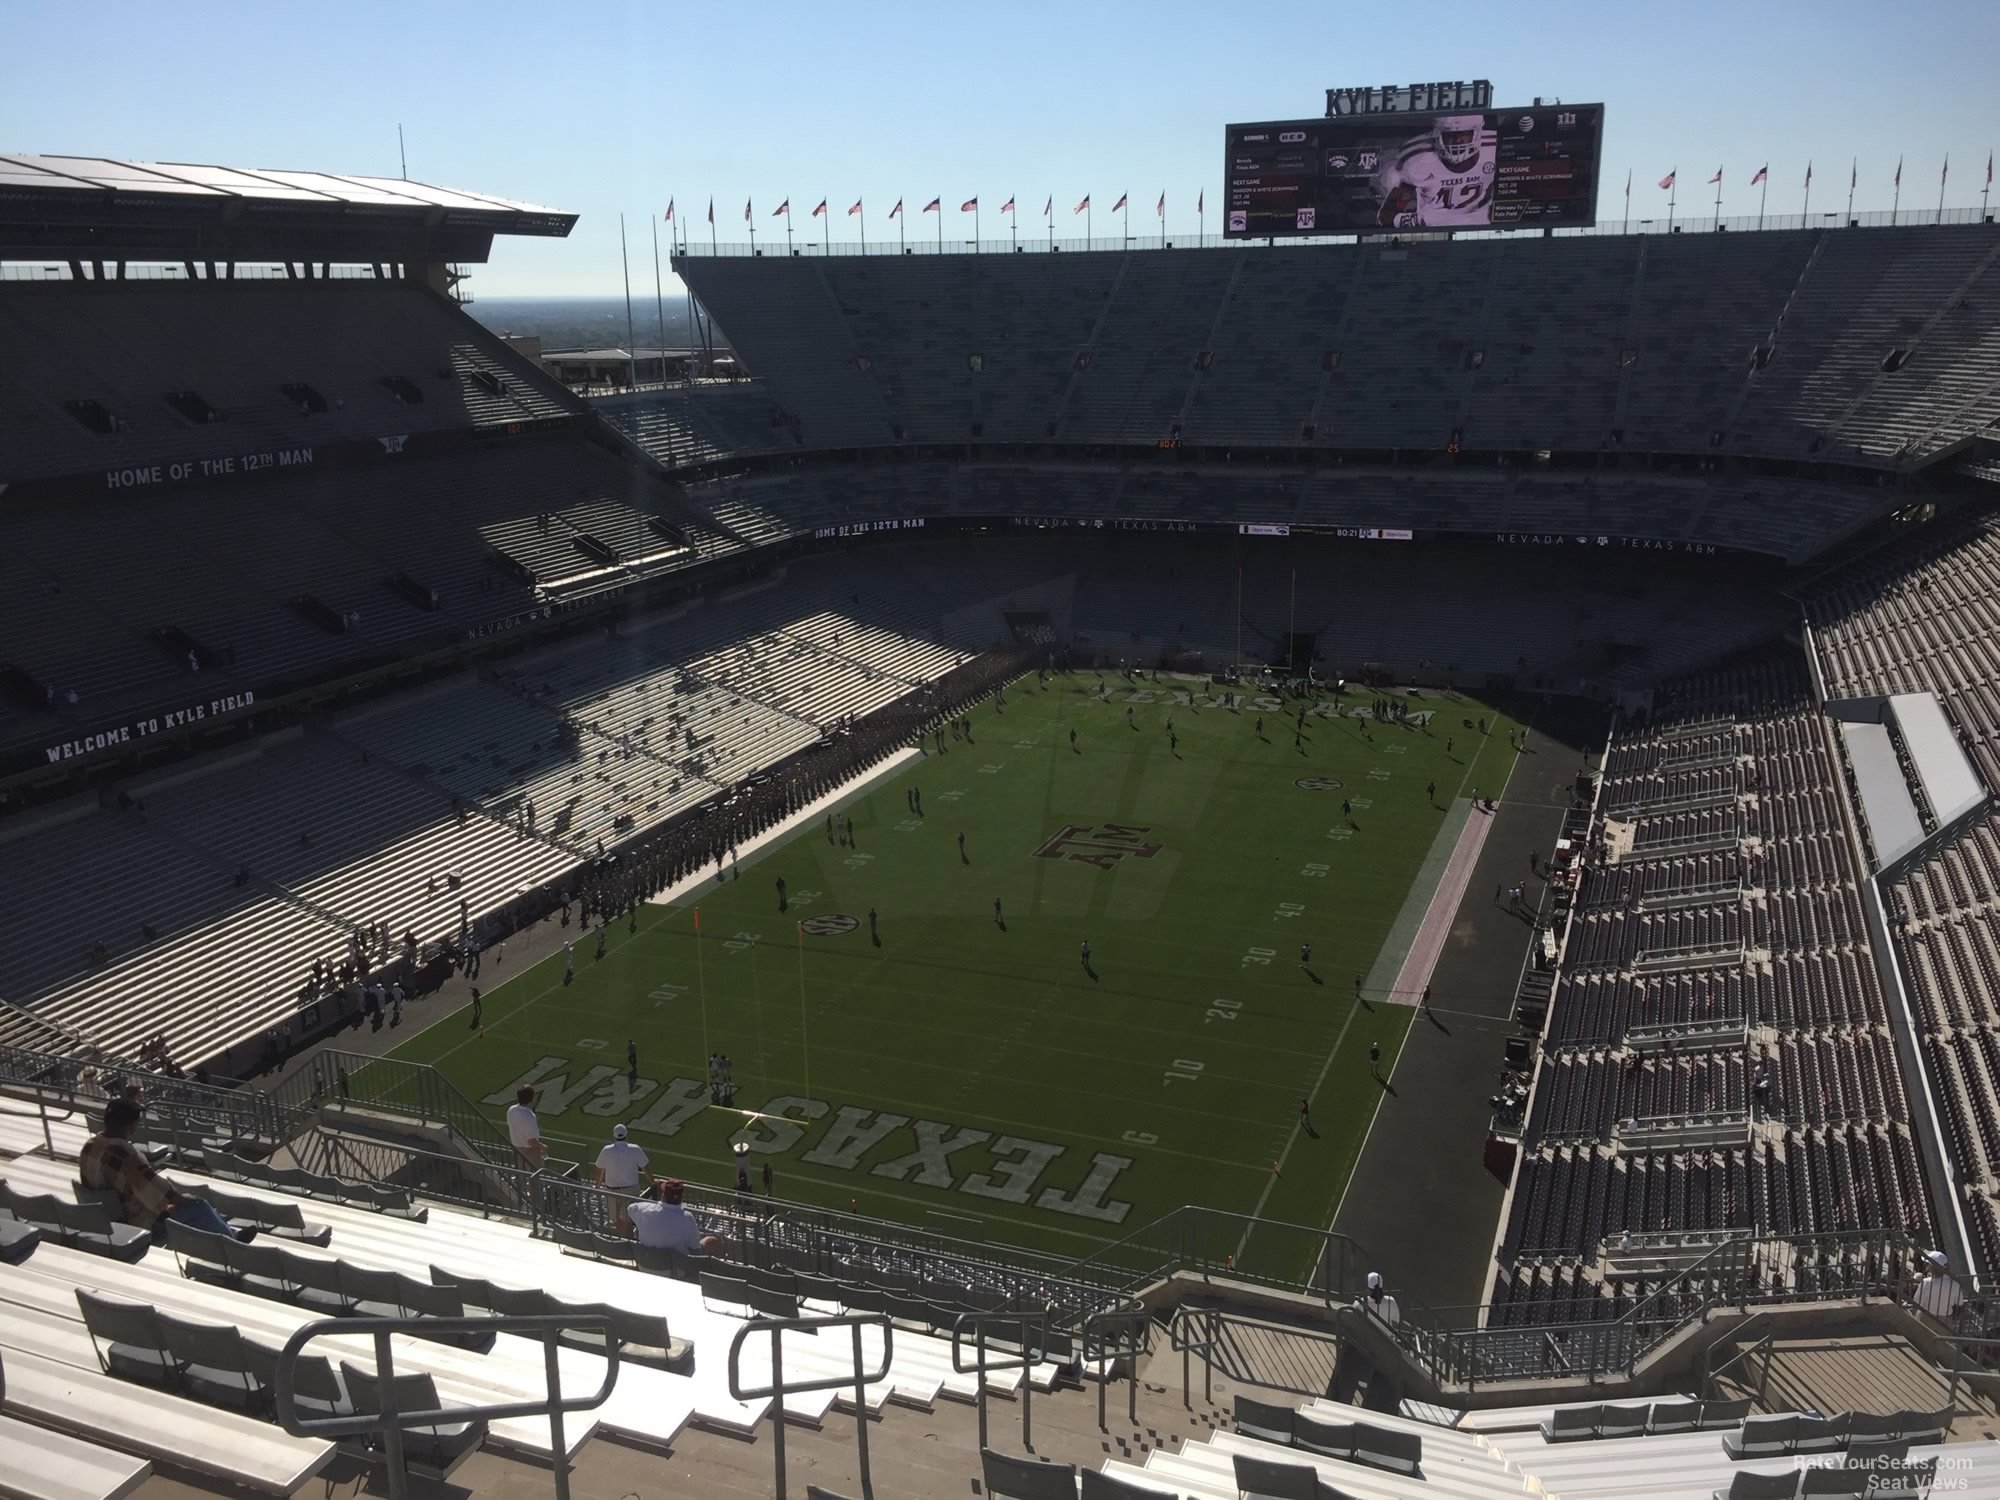 section 411, row 20 seat view  - kyle field